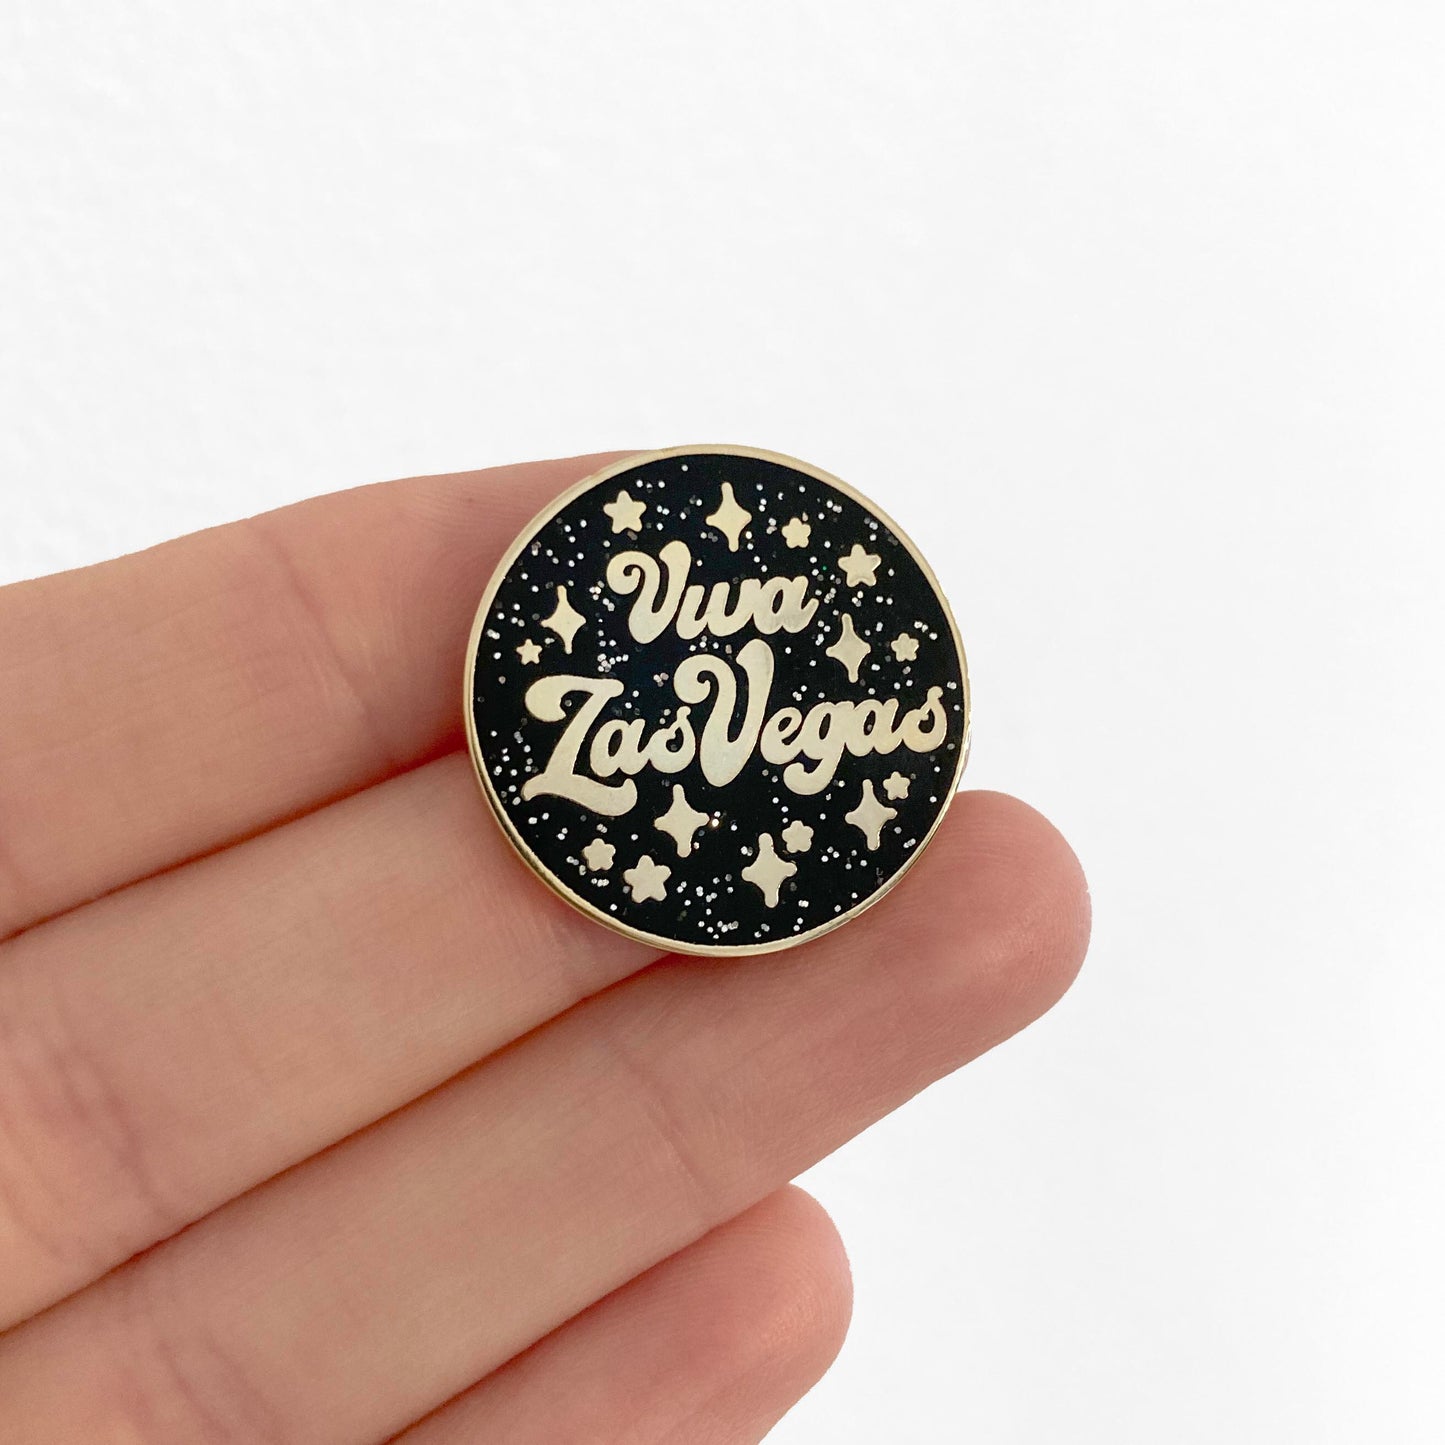 ViViPins™ - Custom Vintage Patches & Much More!